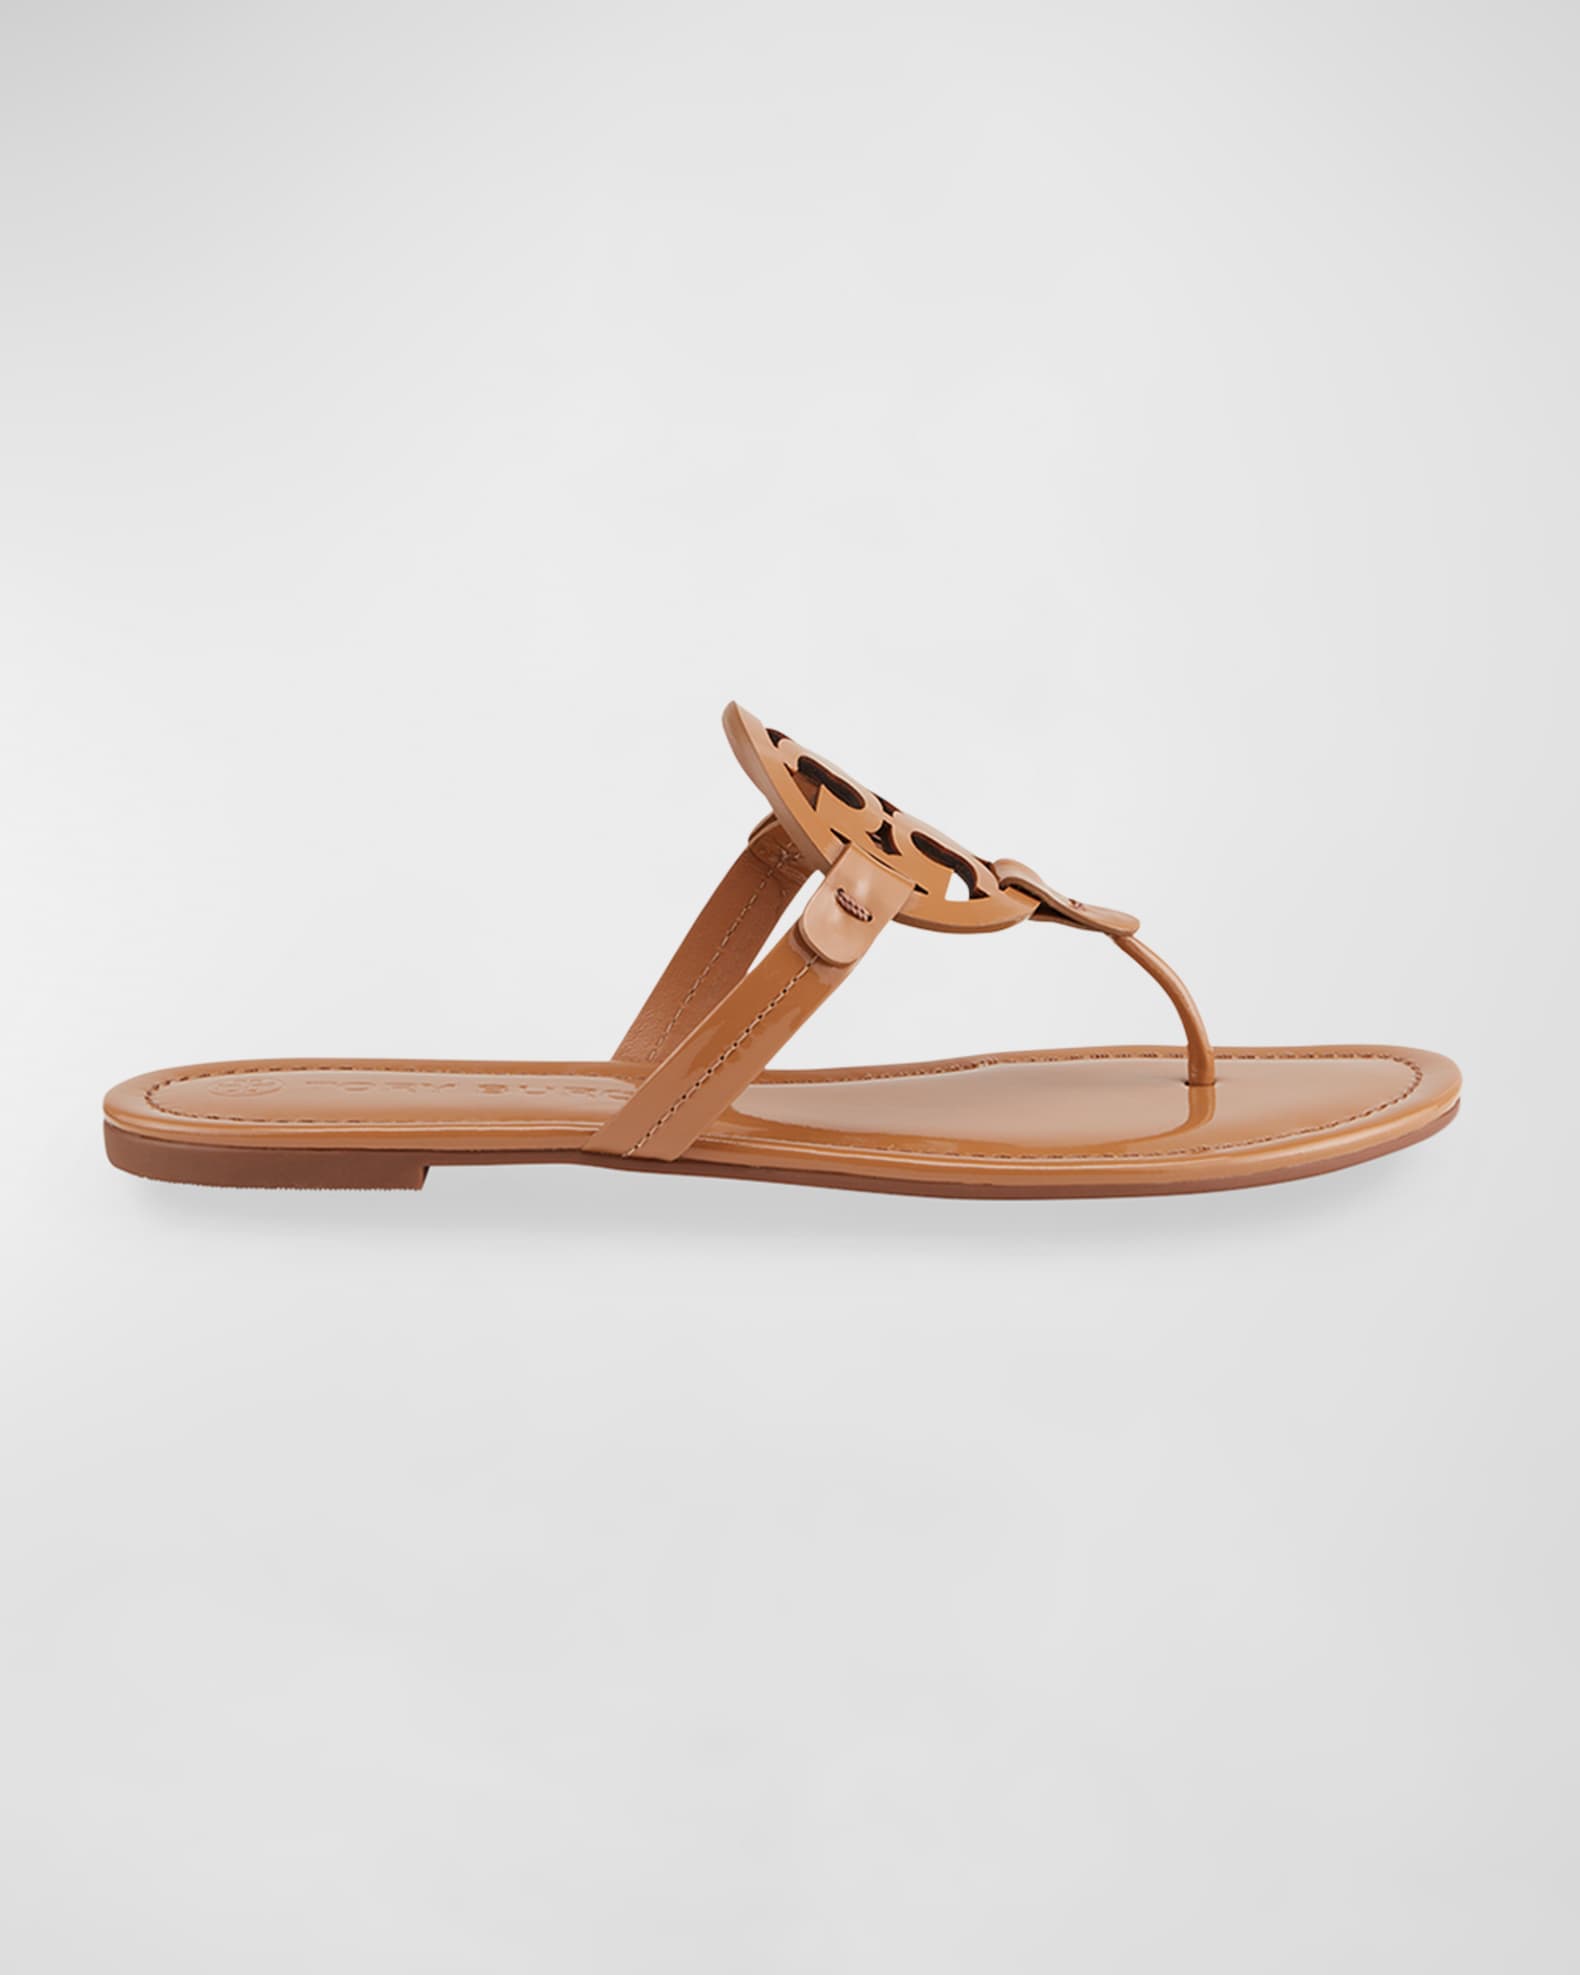 Tory Burch Miller Patent Leather Sandals | Neiman Marcus